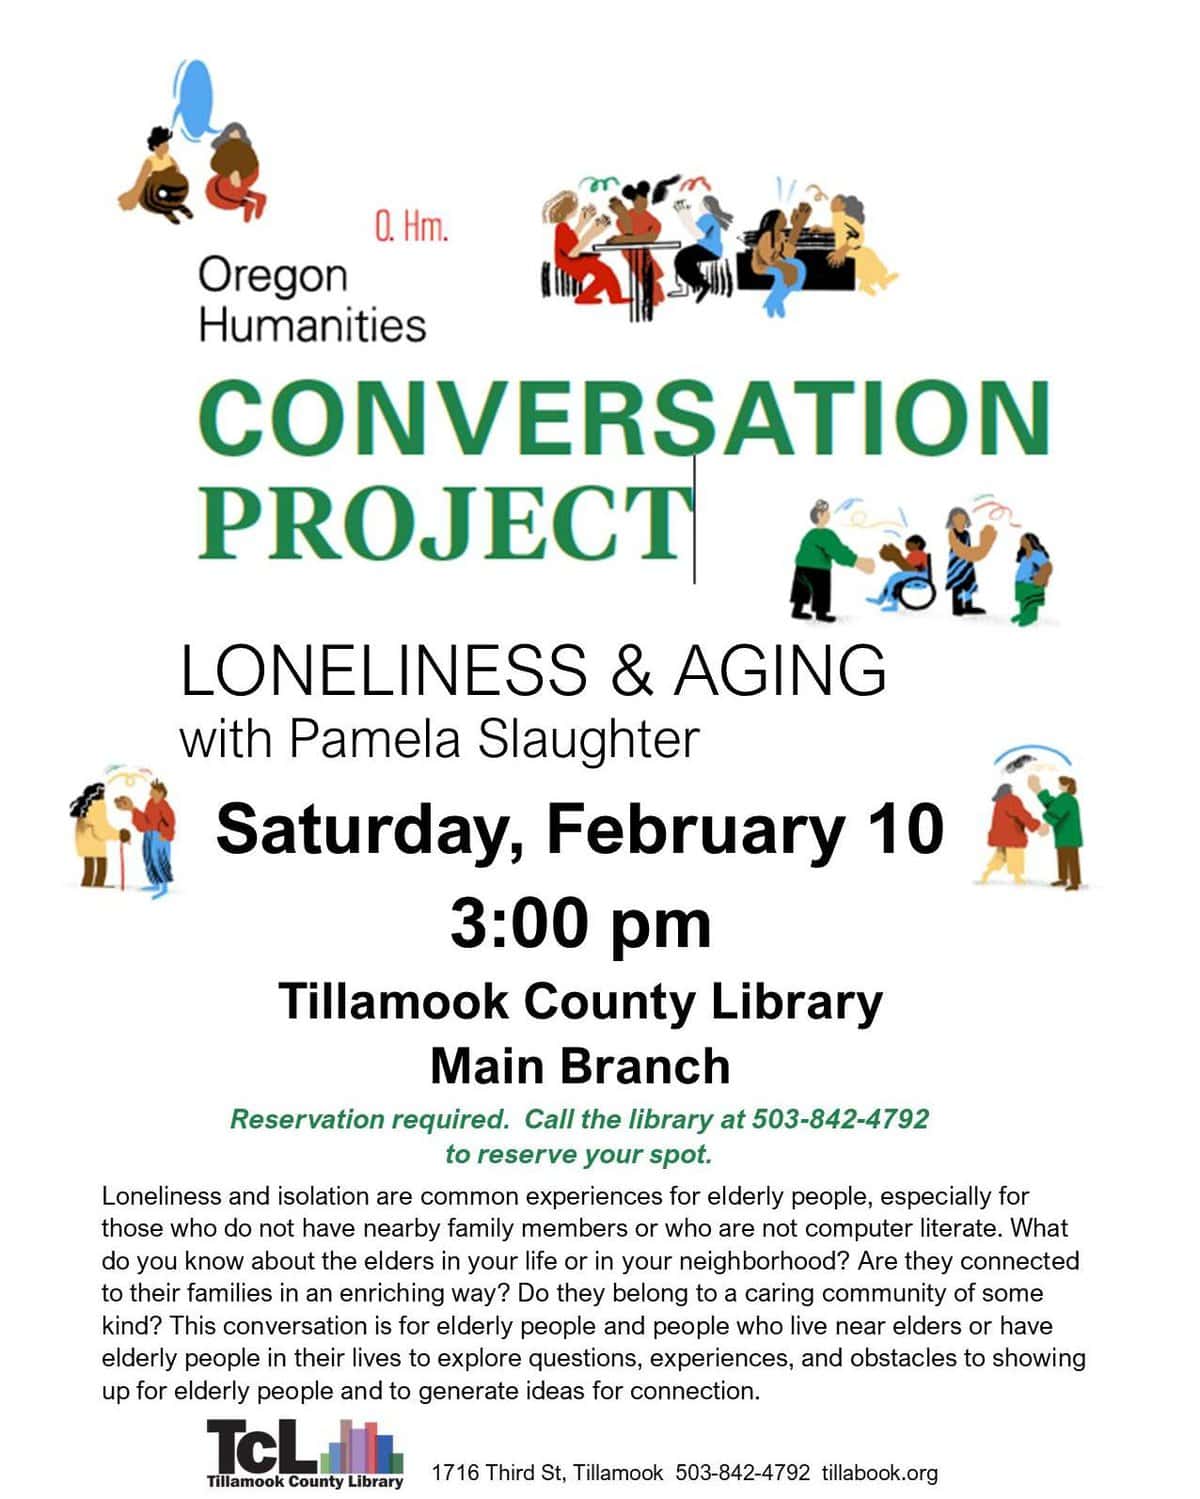 Loneliness & Aging Sat. Feb. 10th at Tillamook Main Library, RSVP